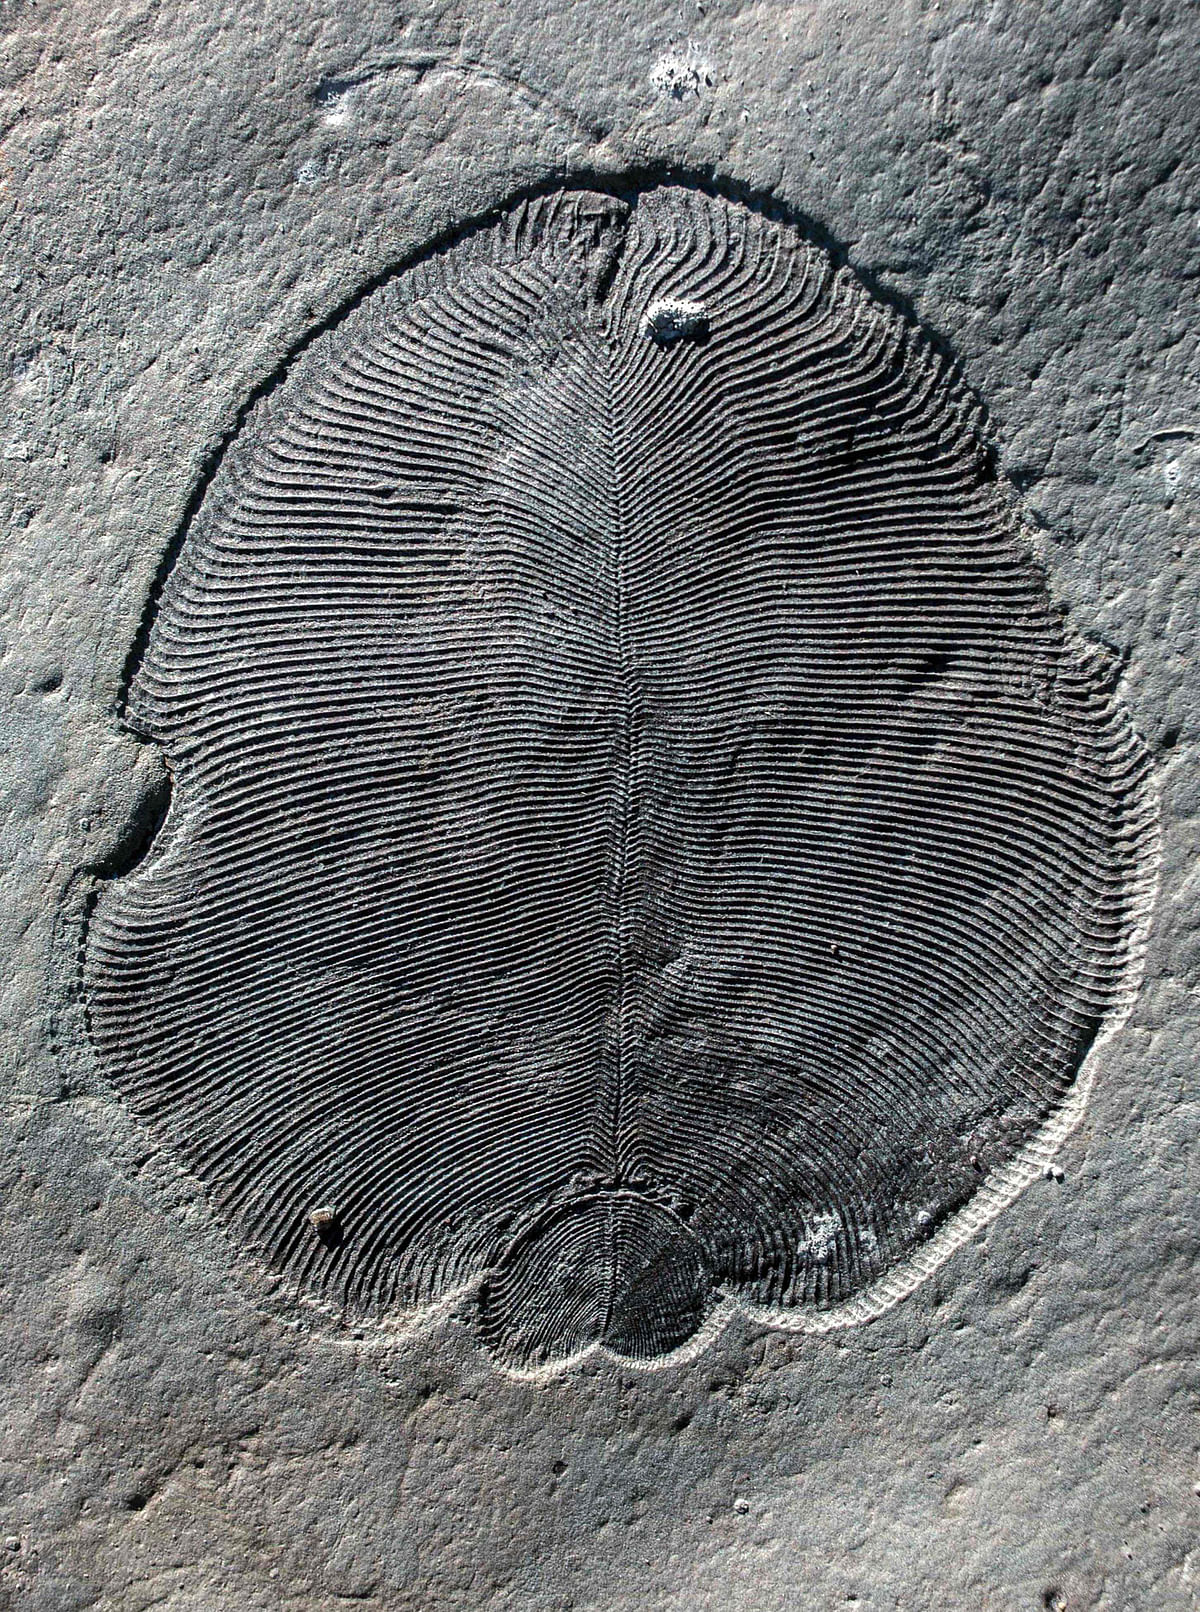 This undated image courtesy of The Australian National University shows, organically preserved “Dickinsonia” fossil from the White Sea area of Russia. Photo: AFP